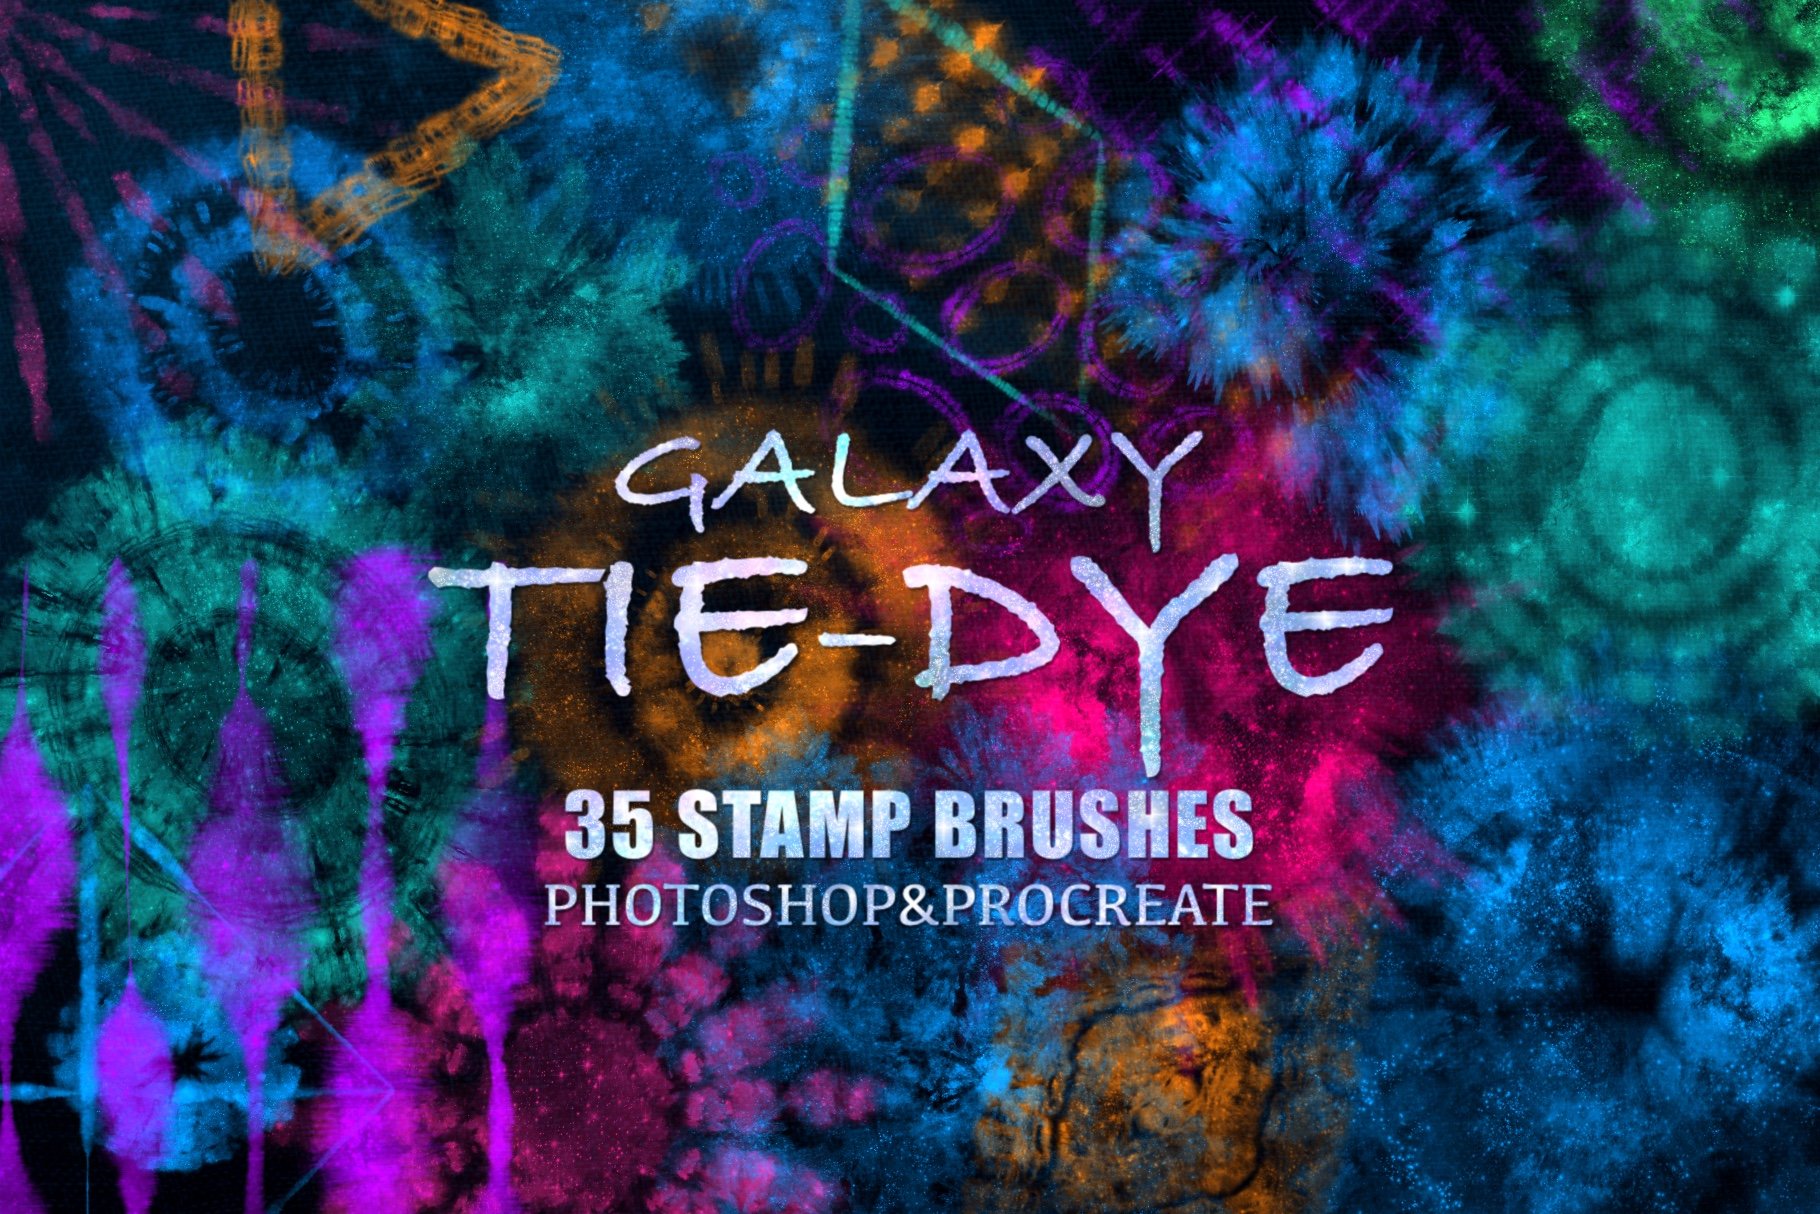 Galaxy Tie Dye Stamp Brushescover image.